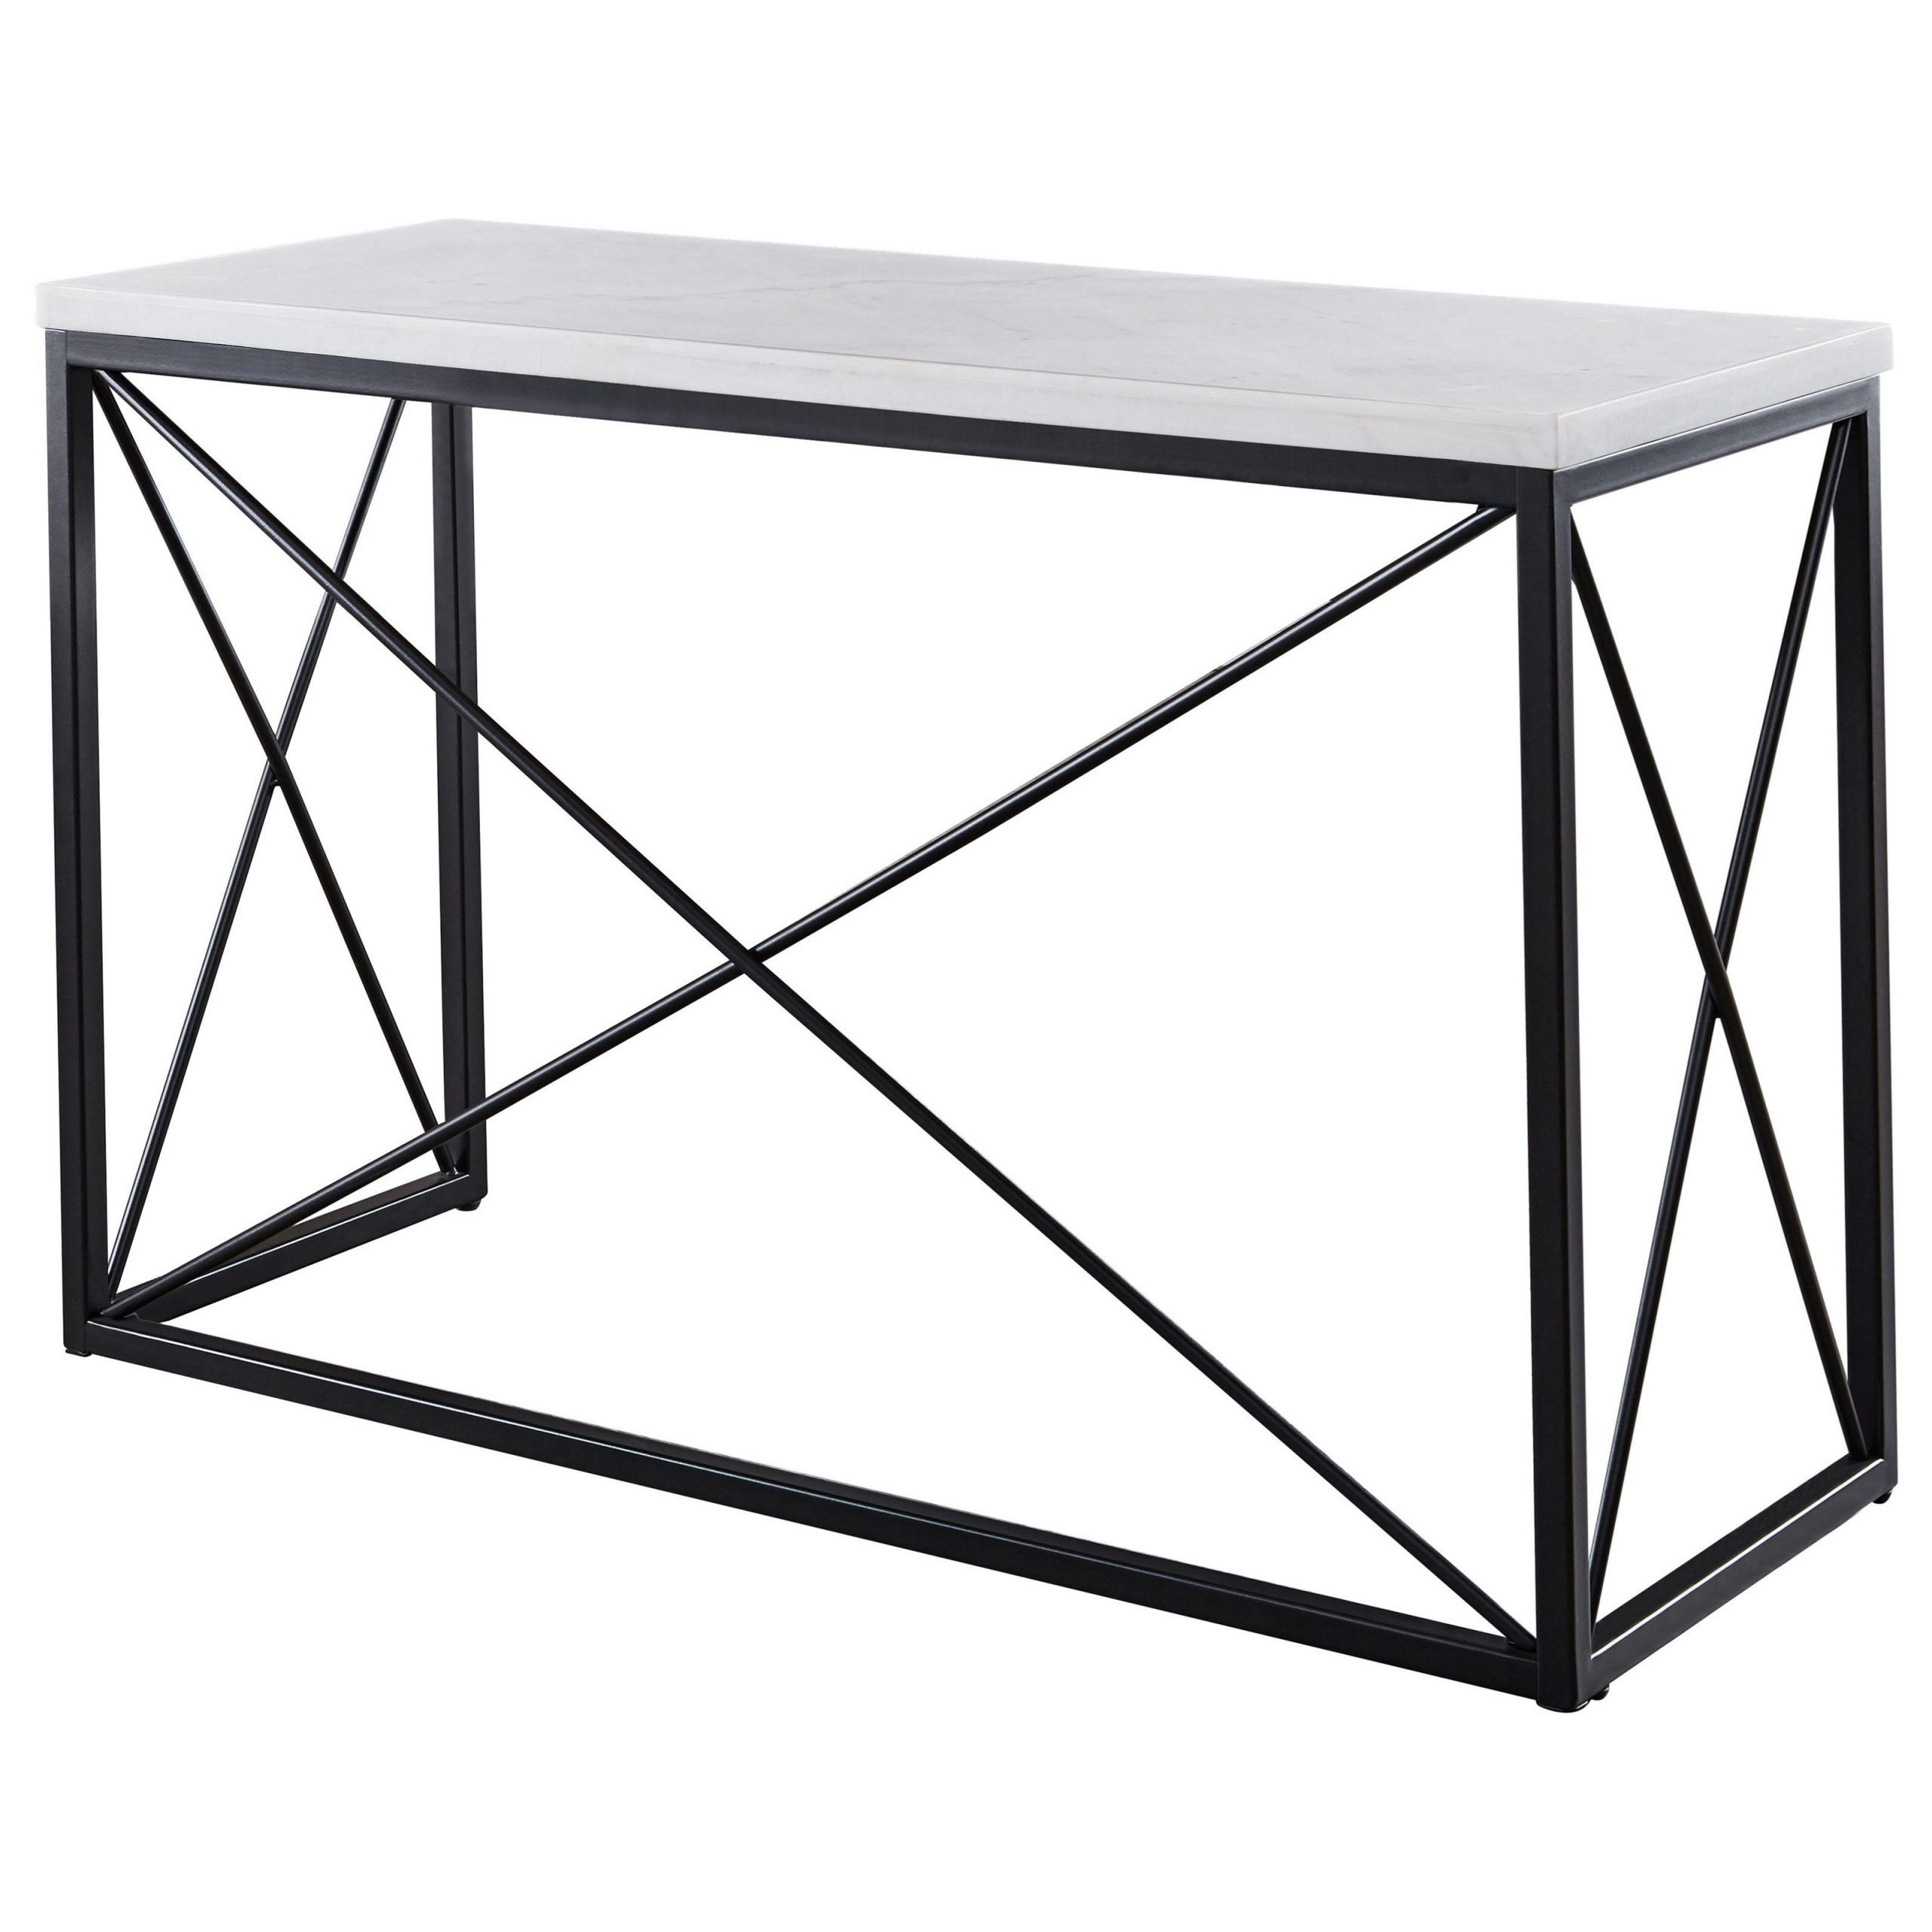 Steve Silver Skyler 1345002 Contemporary White Marble Top With White Stone Console Tables (View 6 of 20)